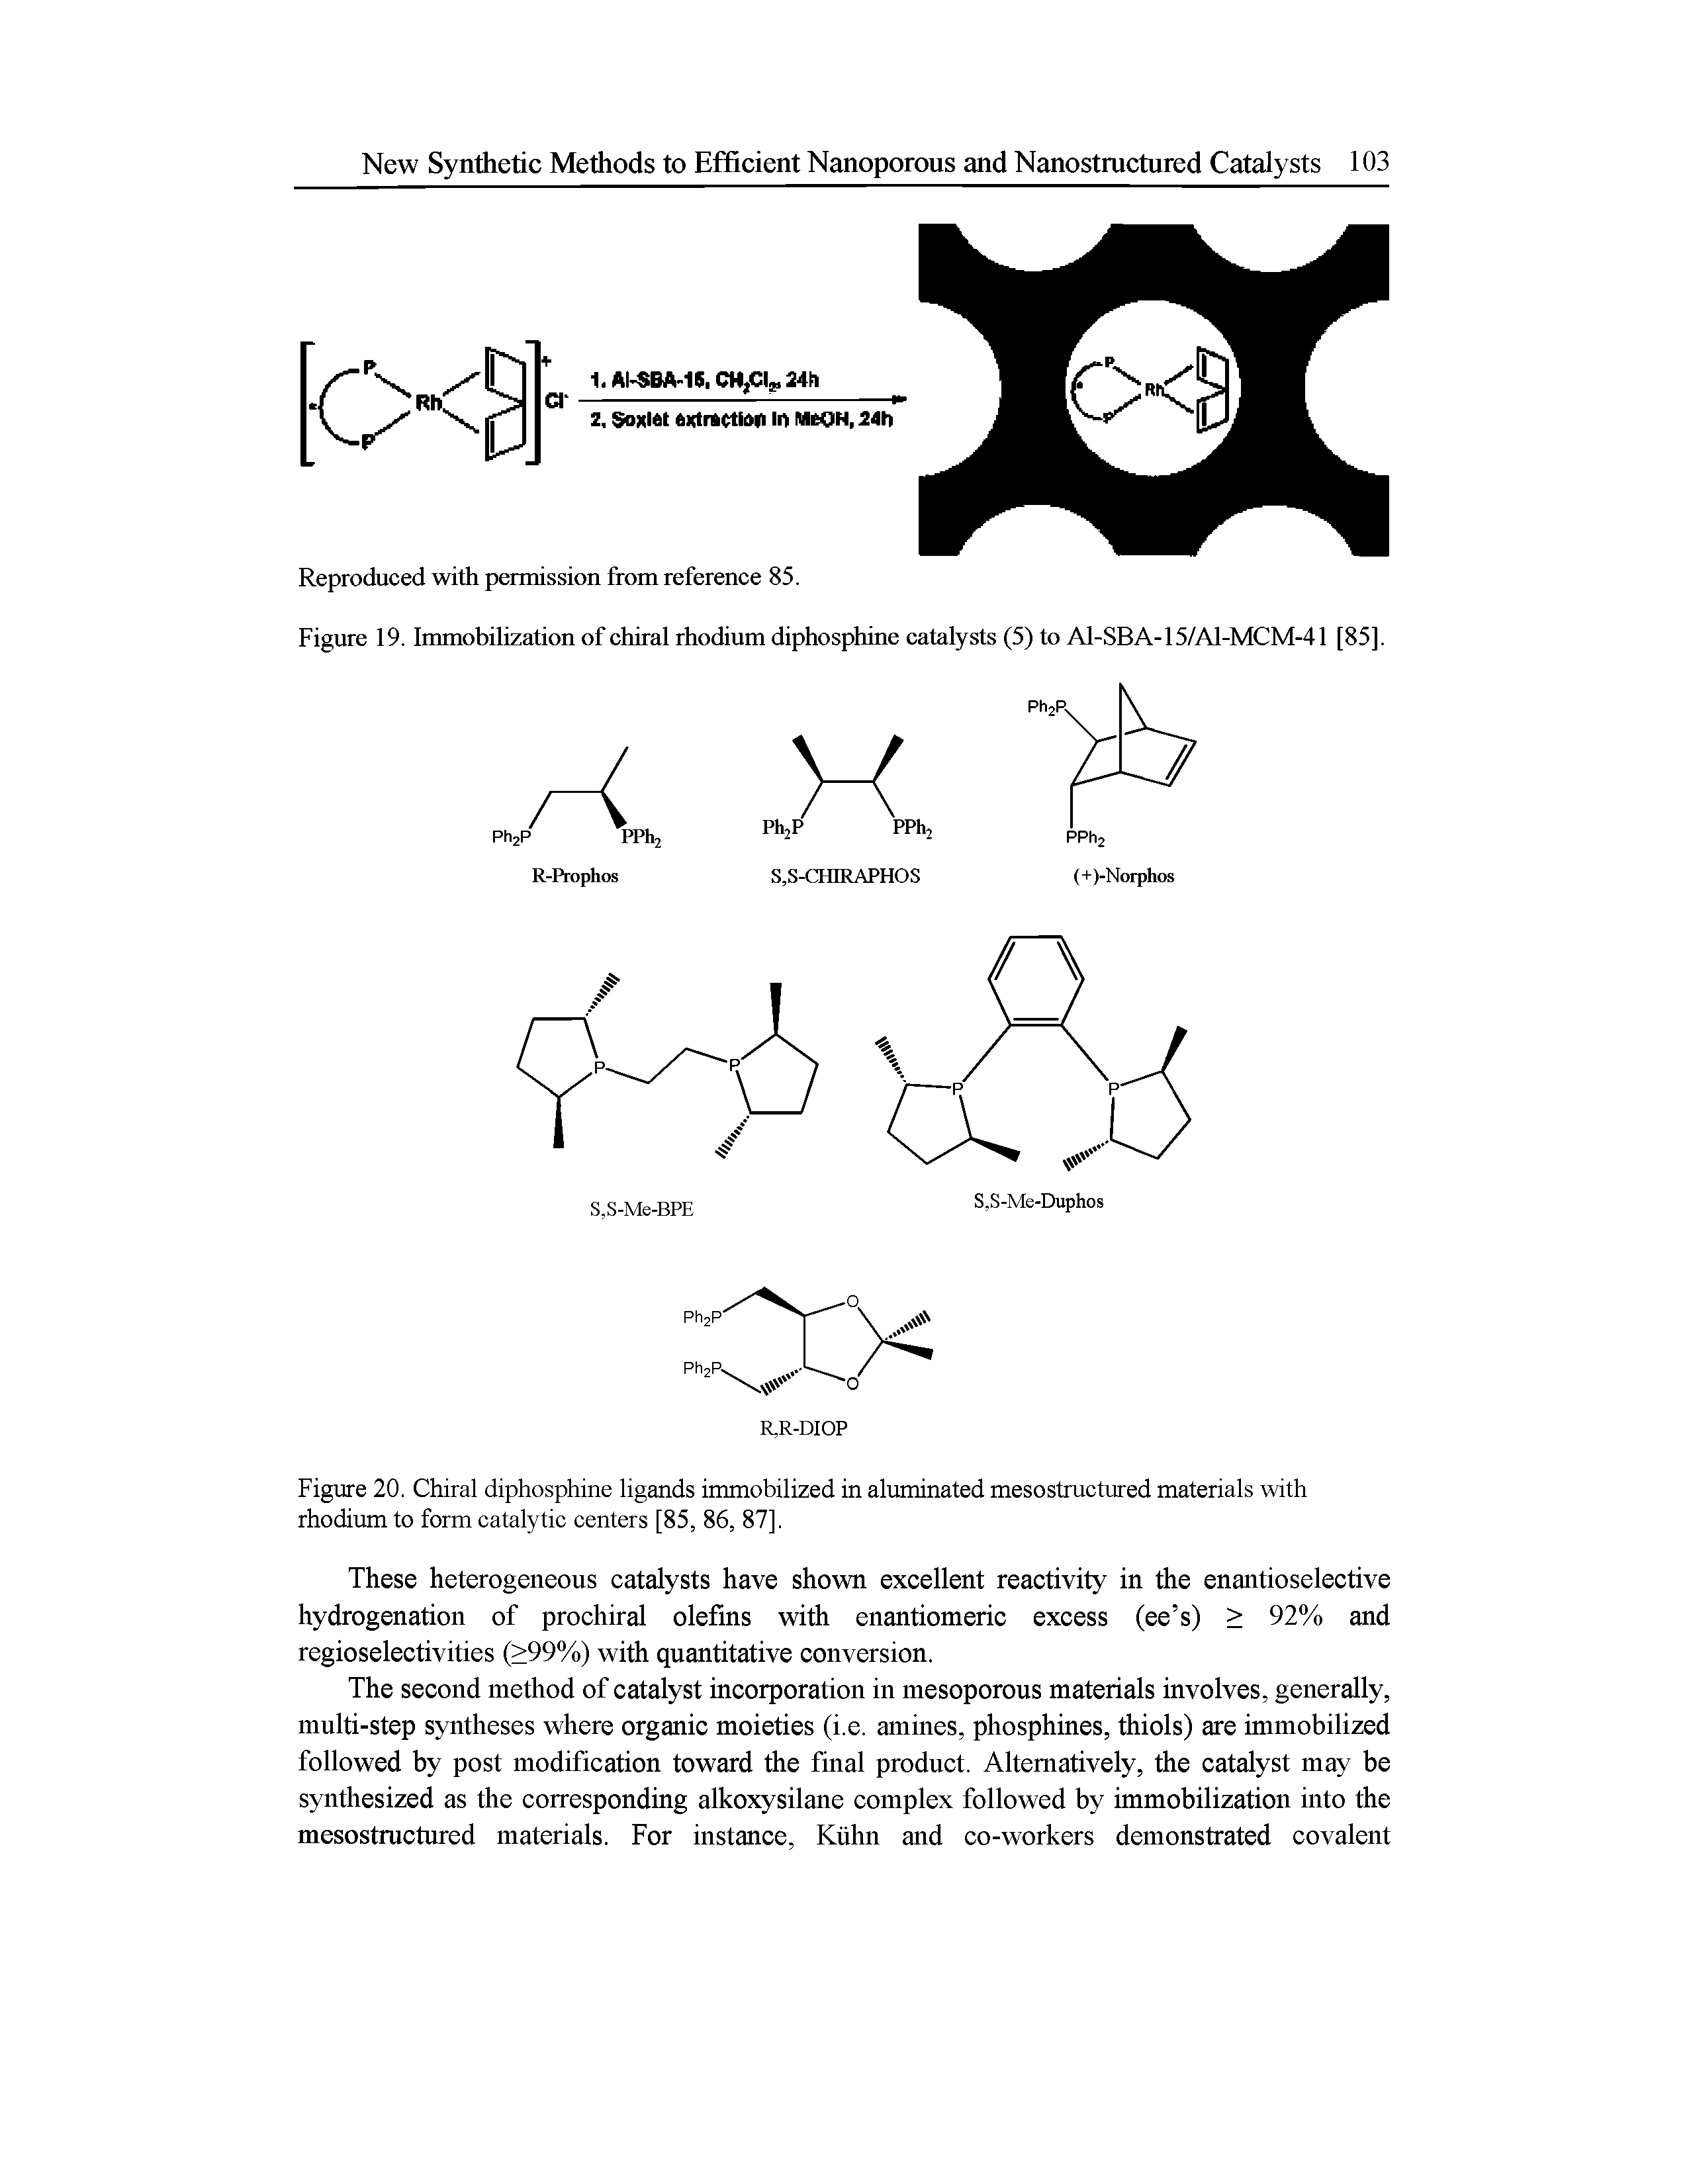 Figure 20. Chiral diphosphine ligands immobilized in aluminated mesostructured materials with rhodium to form catalytic centers [85, 86, 87].